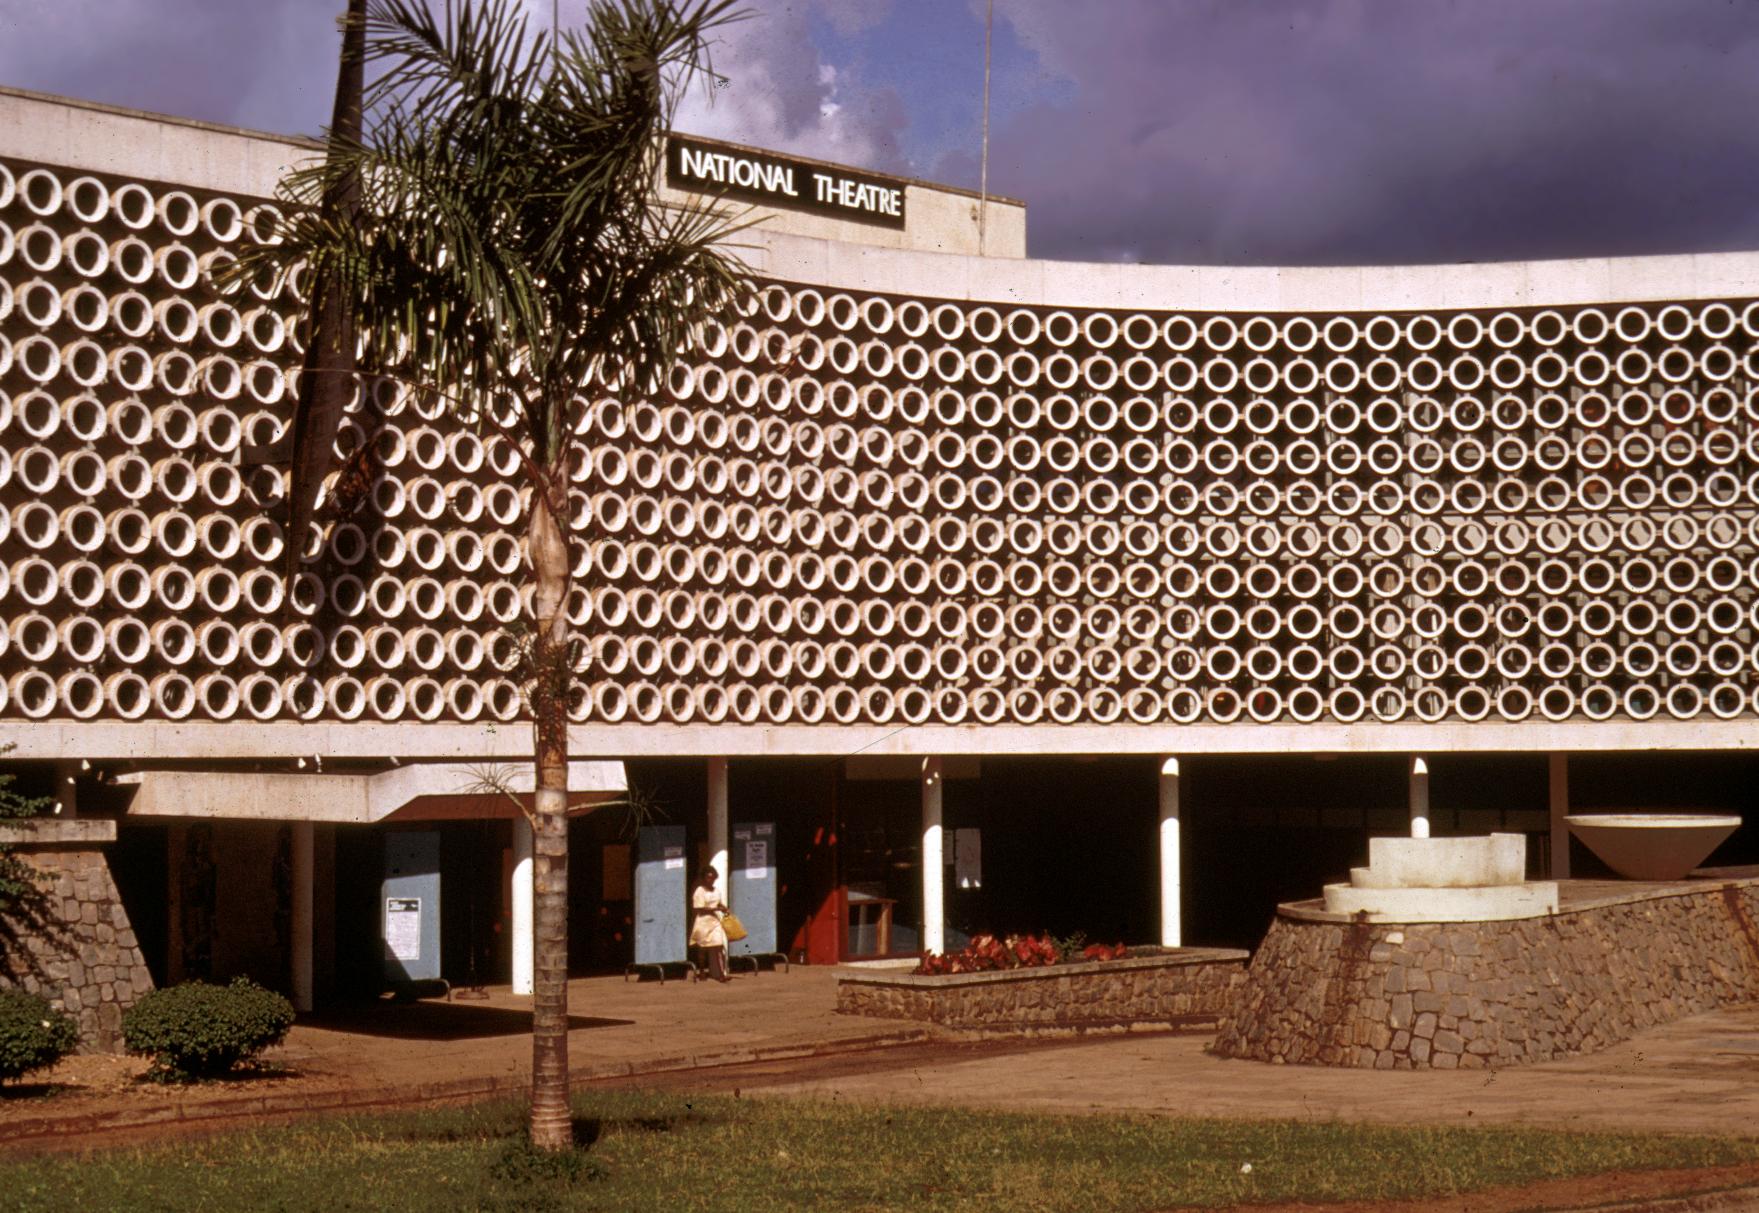 The National Theater in Kampala